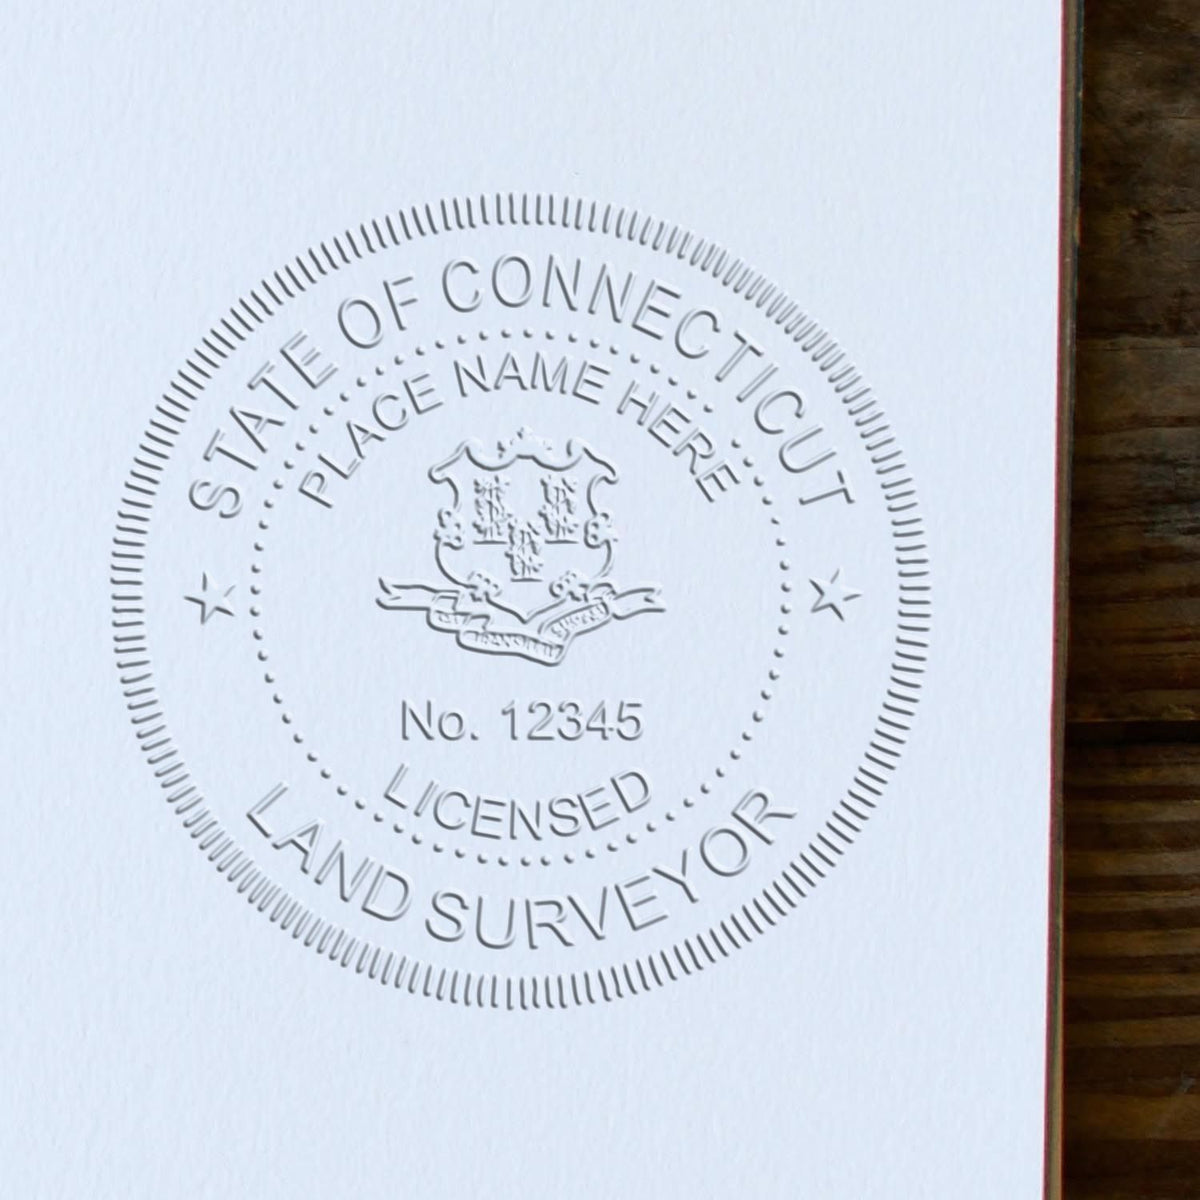 A stamped impression of the Handheld Connecticut Land Surveyor Seal in this stylish lifestyle photo, setting the tone for a unique and personalized product.